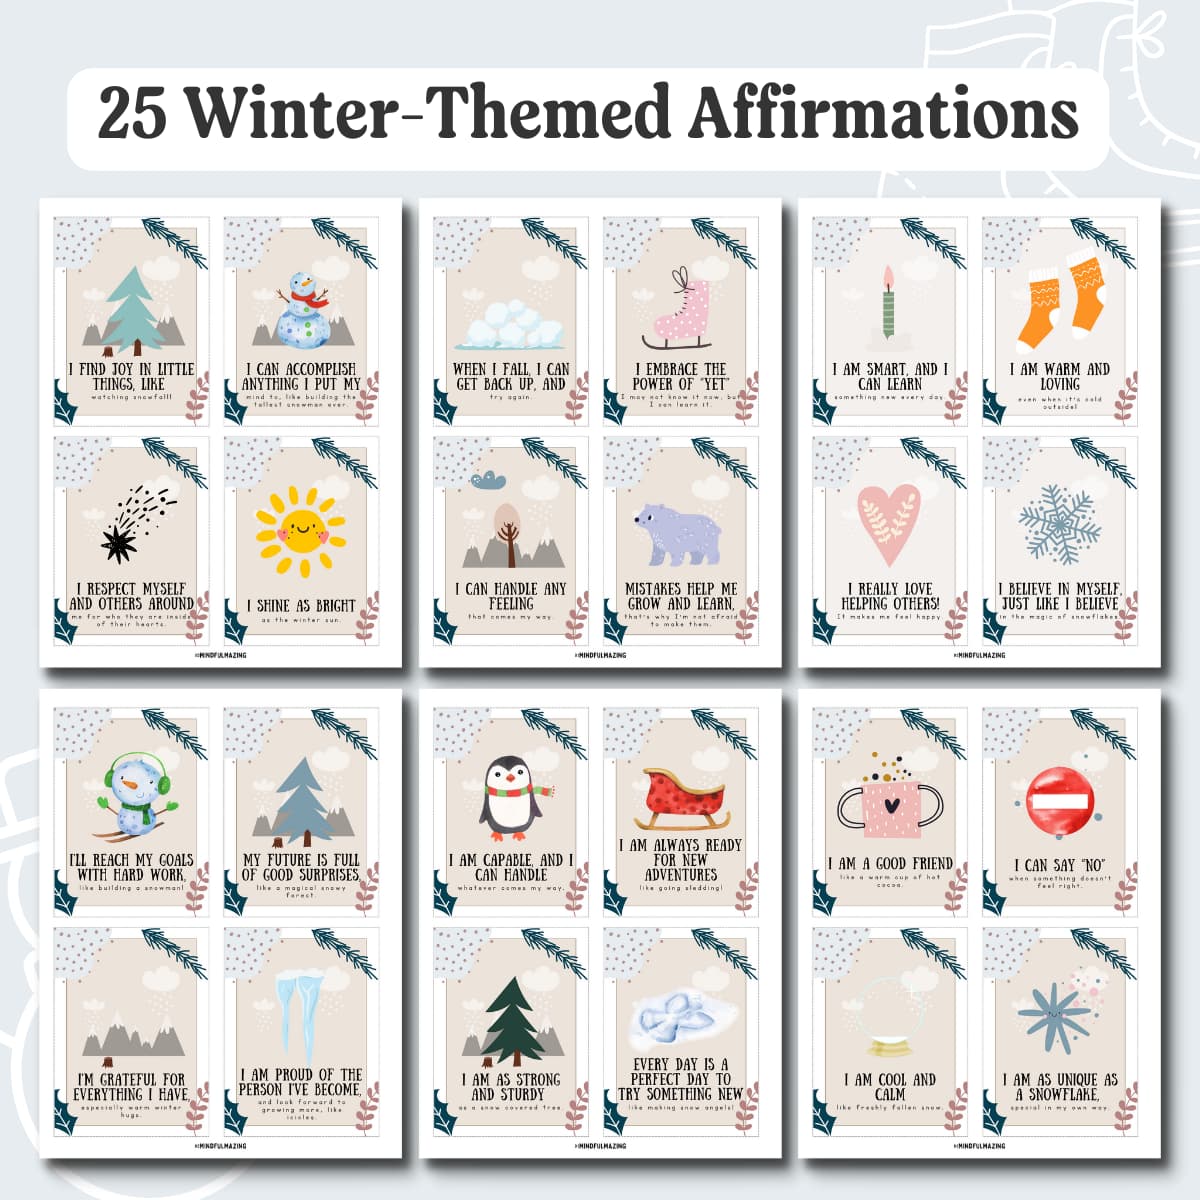 Winter-themed Affirmations